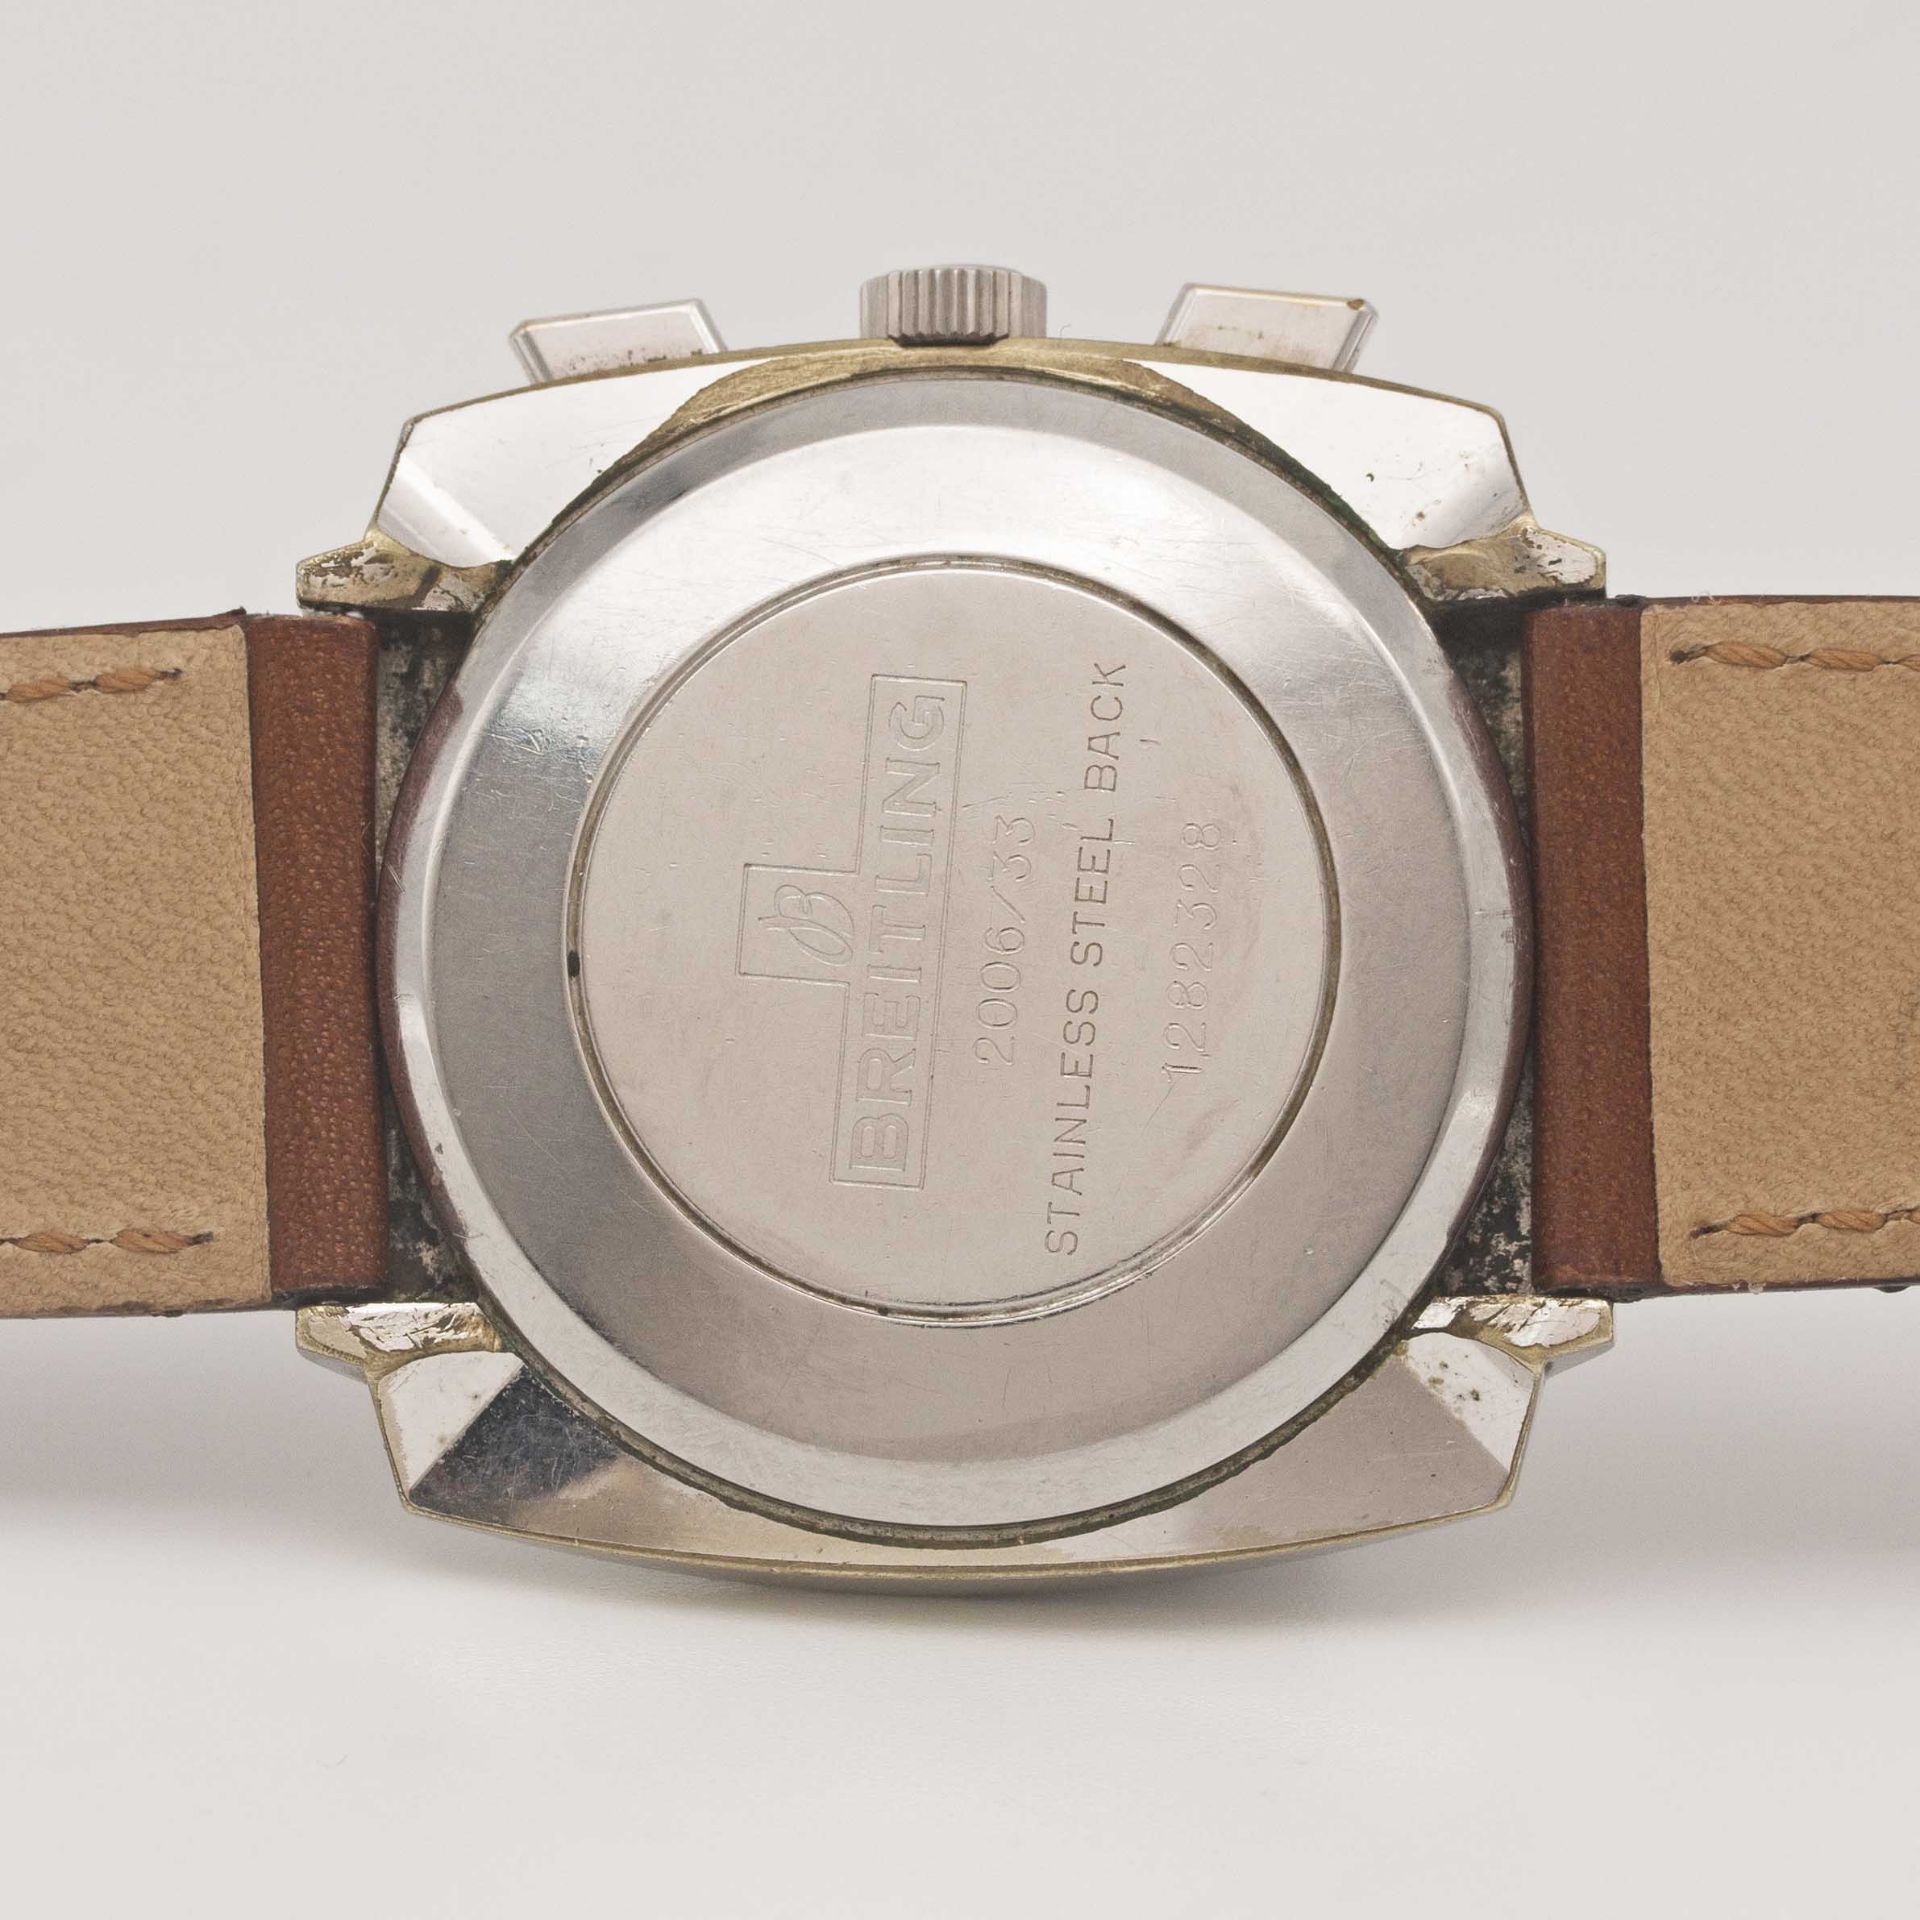 A GENTLEMAN'S BREITLING TOP TIME CHRONOGRAPH WRIST WATCH CIRCA 1969, REF. 2006/33 WITH "PANDA" - Image 6 of 9